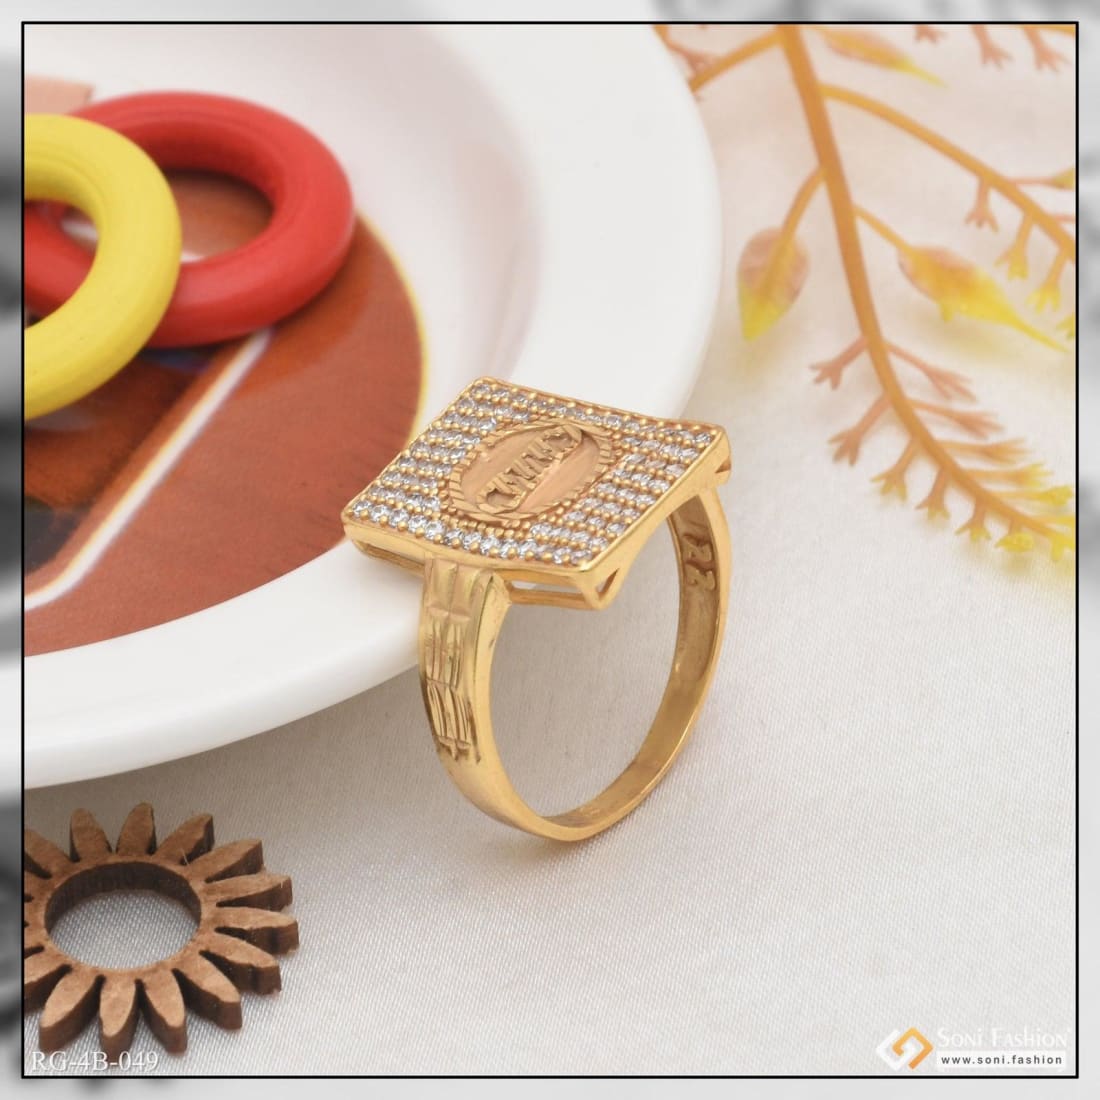 Heavy Rings Designs For Women /Ladies | New Rings Collection | Gold Rings  With Weight 2021 | Ring designs, Ring collections, Gold rings